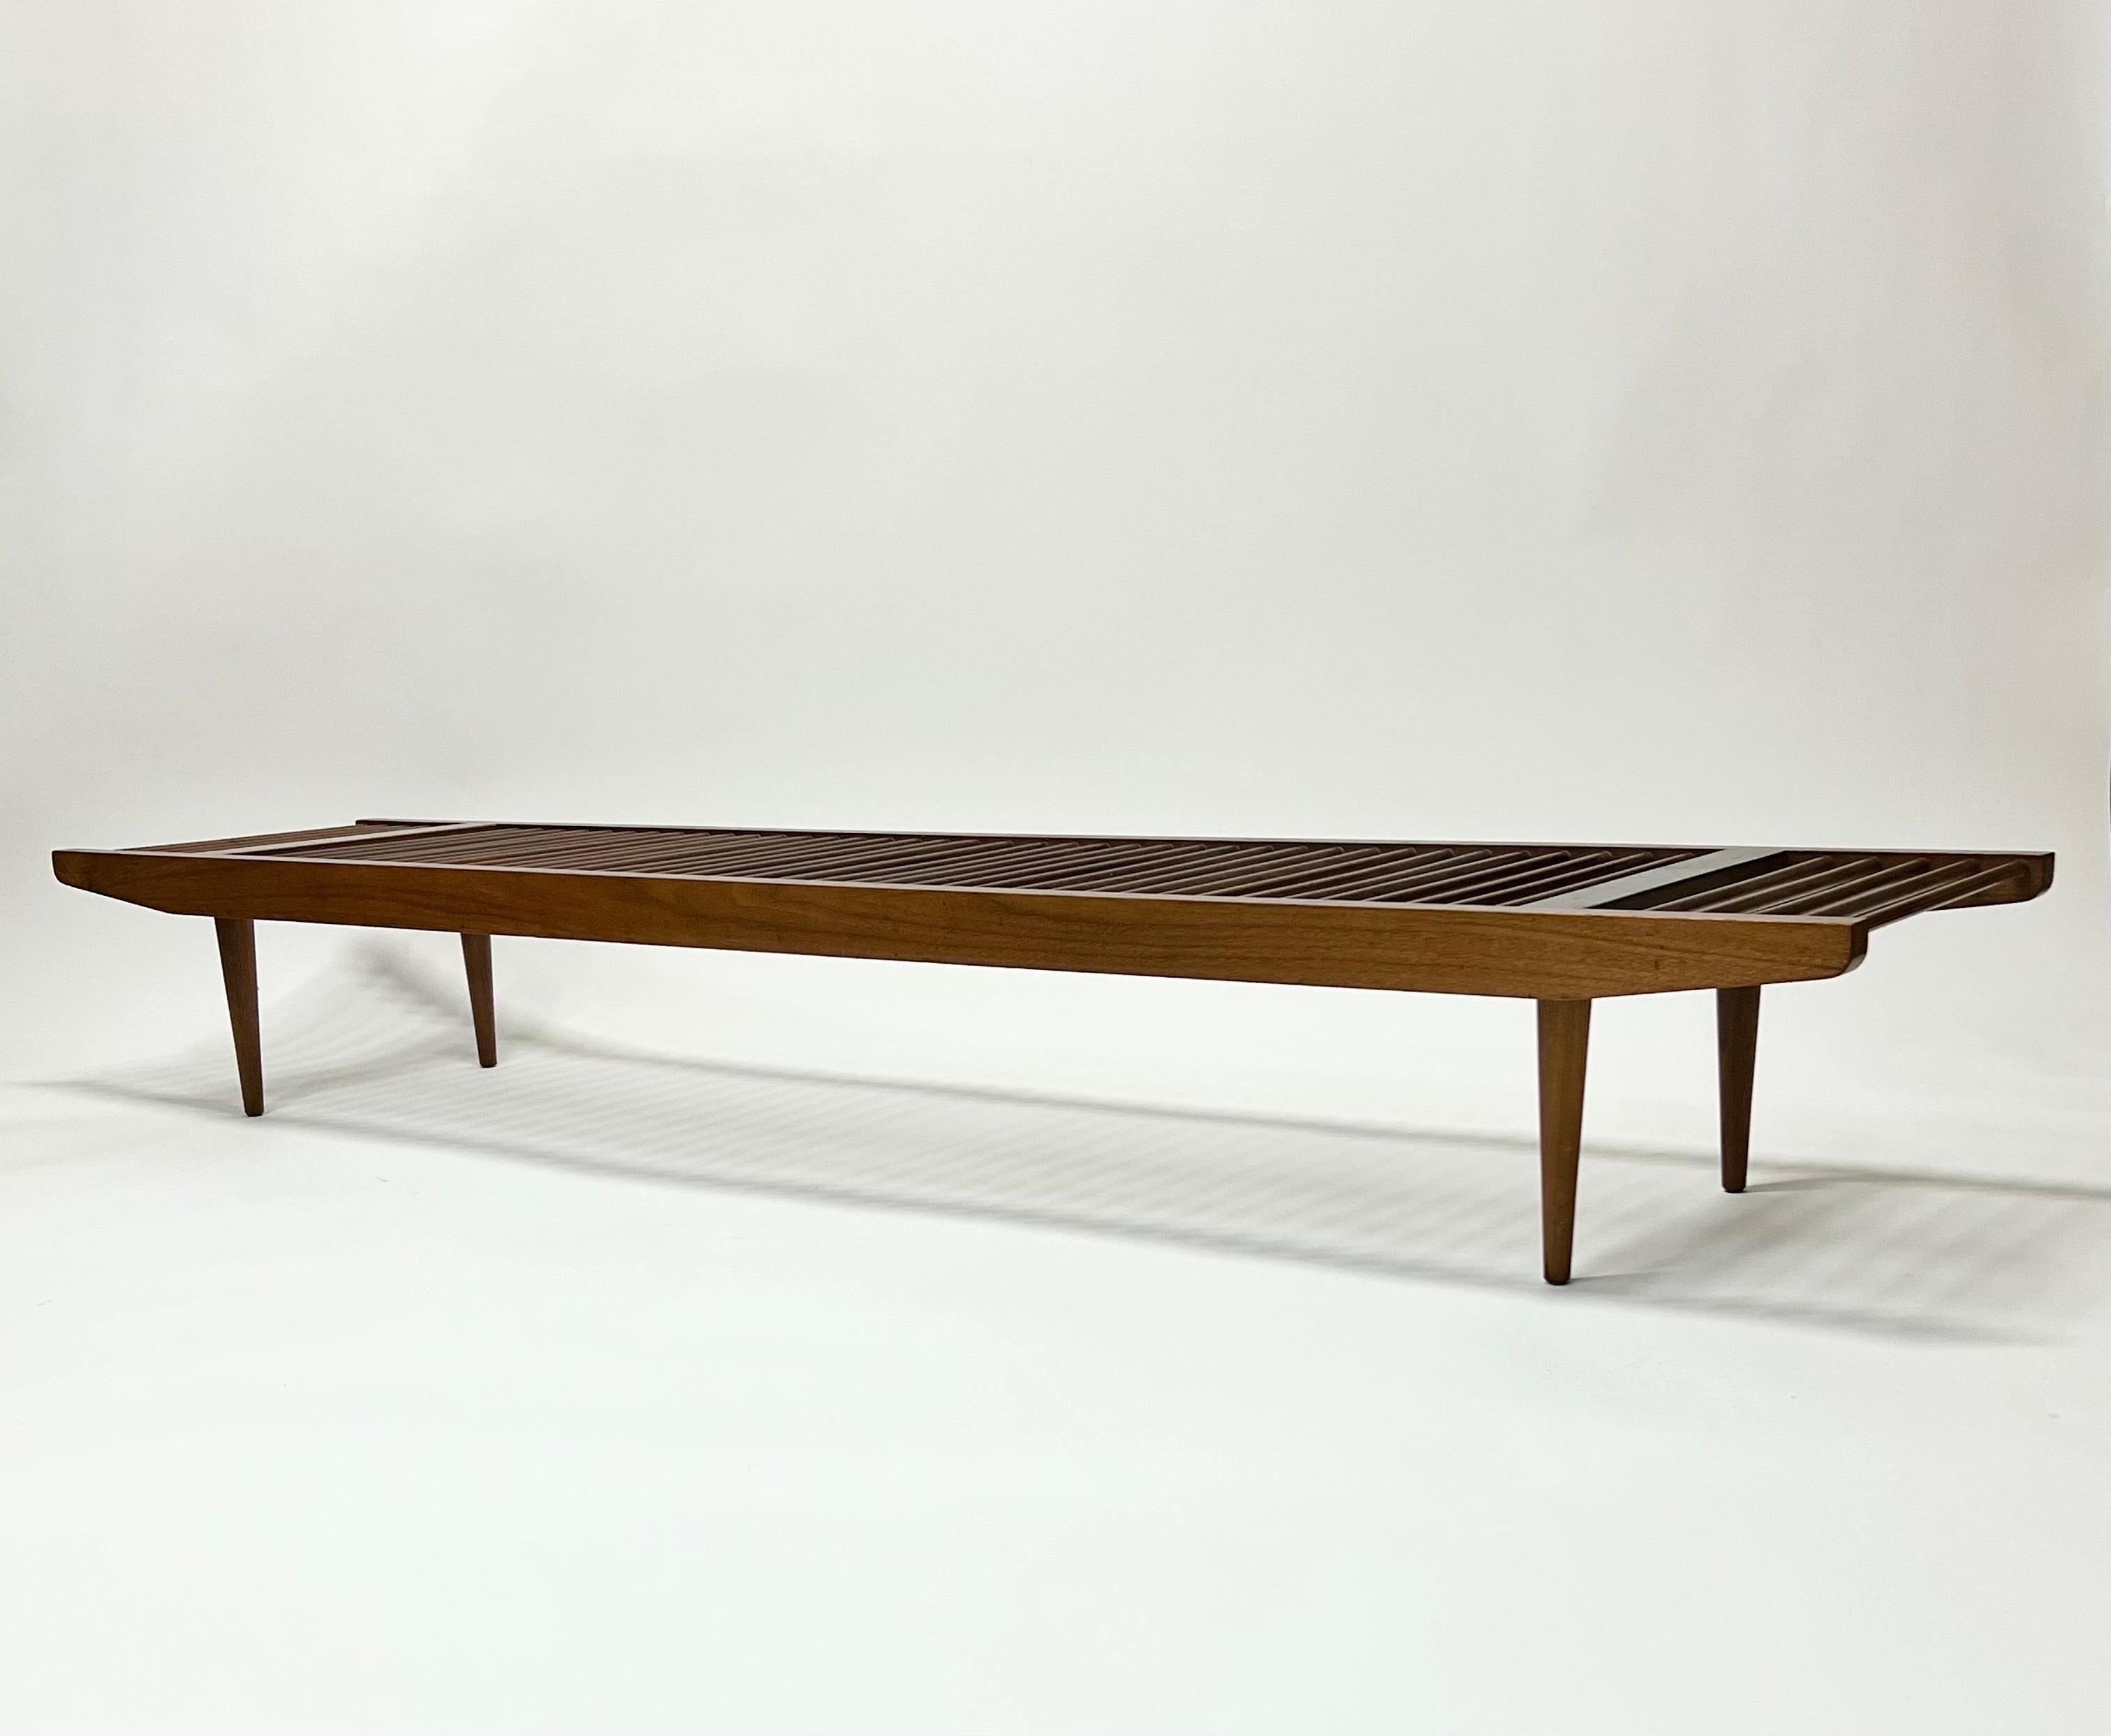 Stunning long and low walnut dowel bench designed by Milo Baughman for Glenn of California c1950s. All original condition with a wonderful patina and great lines. Legs unscrew for easy transport or storage. This is the largest of the 3 different